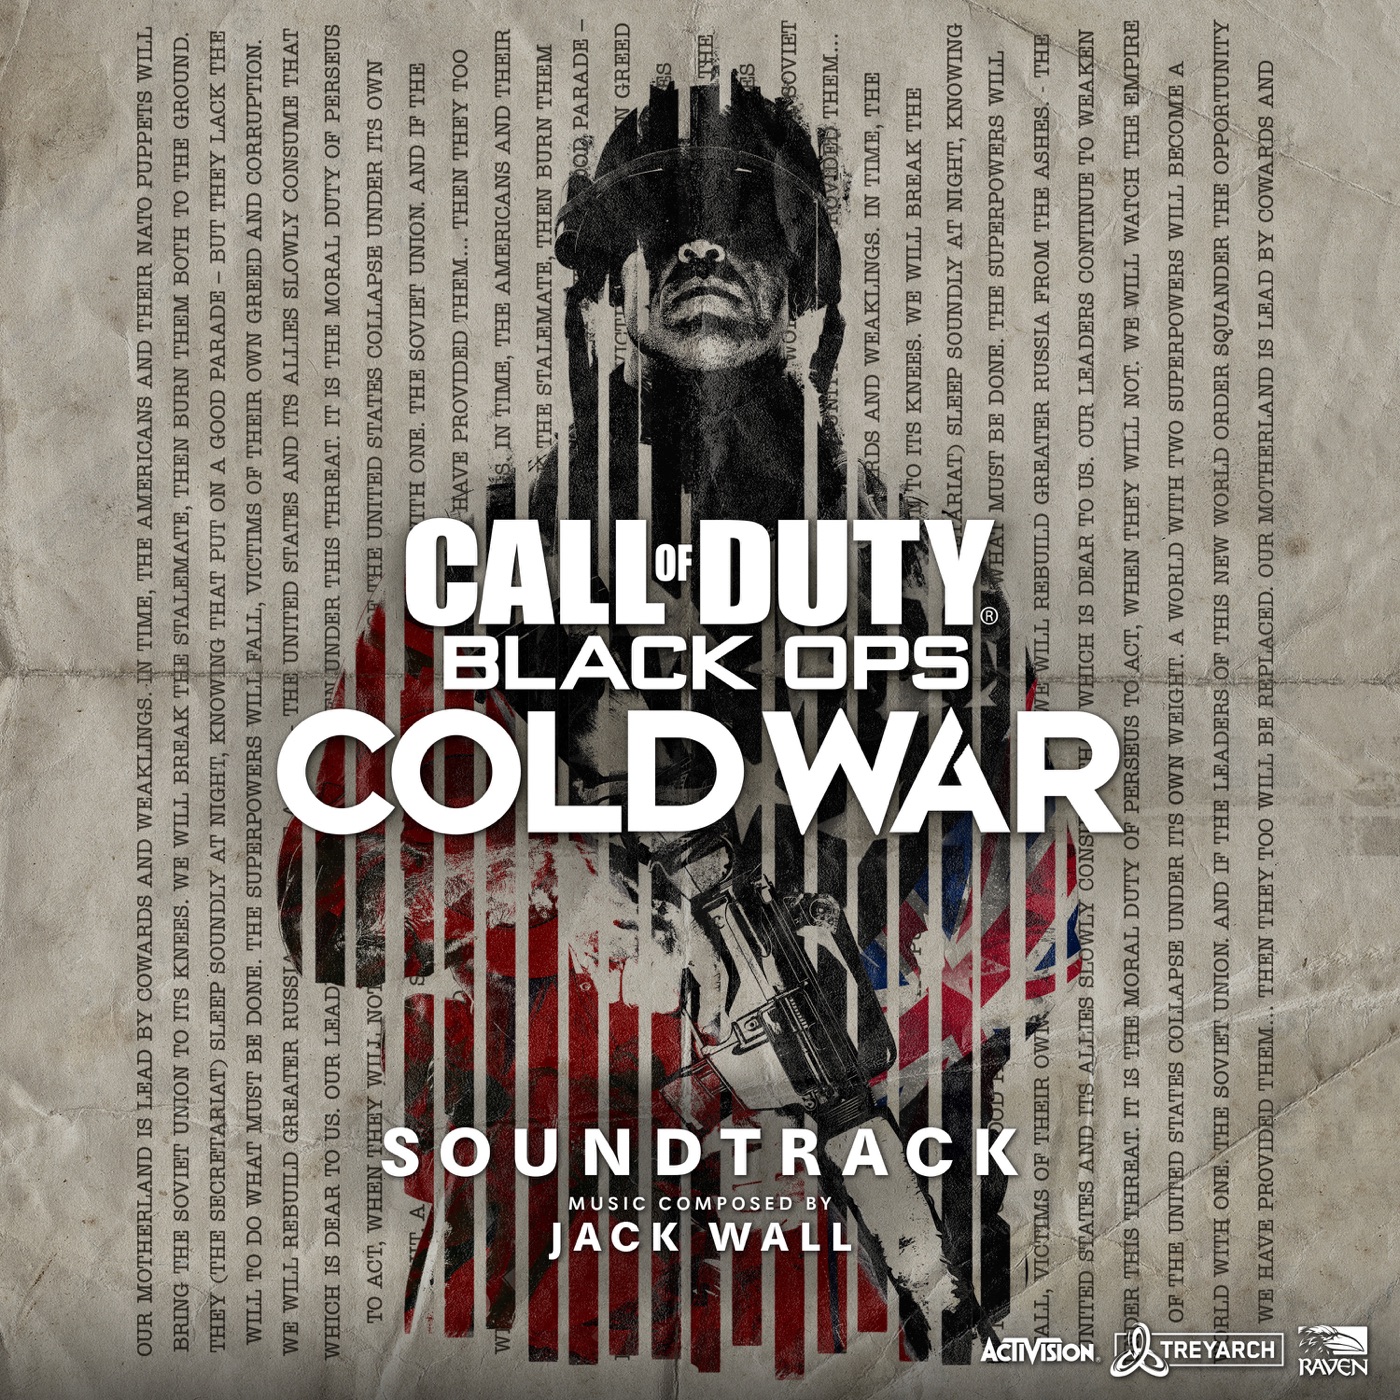 Call of Duty® Black Ops: Cold War (Official Game Soundtrack) by Jack Wall